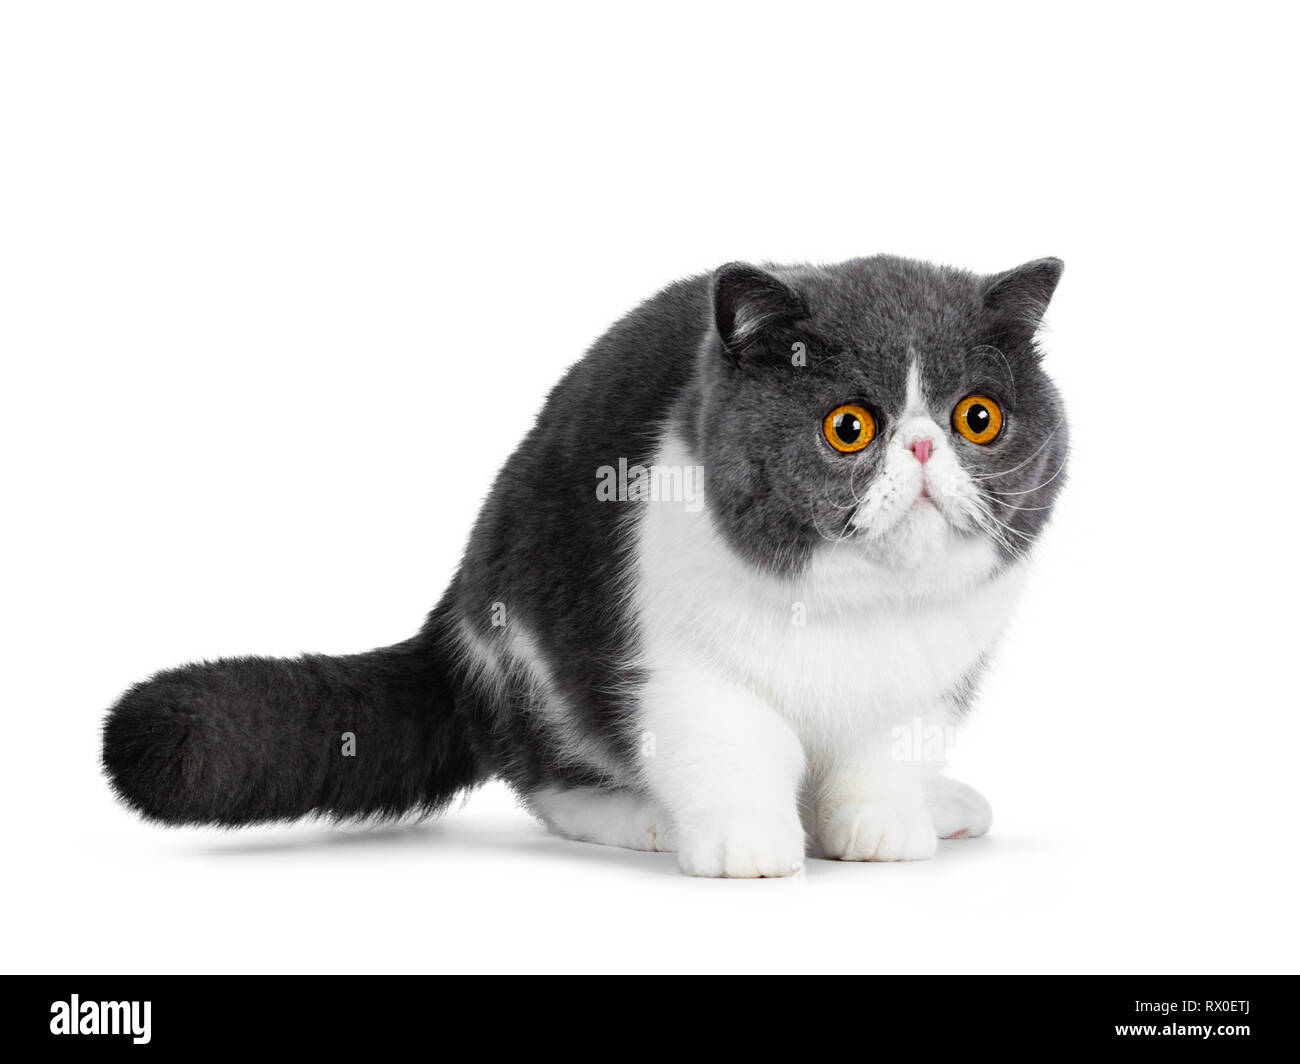 Cute blue with white young Exotic Shorthair cat, standing side ways. Looking curious straightahead beside lens with amazing round orange eyes. Isolate Stock Photo